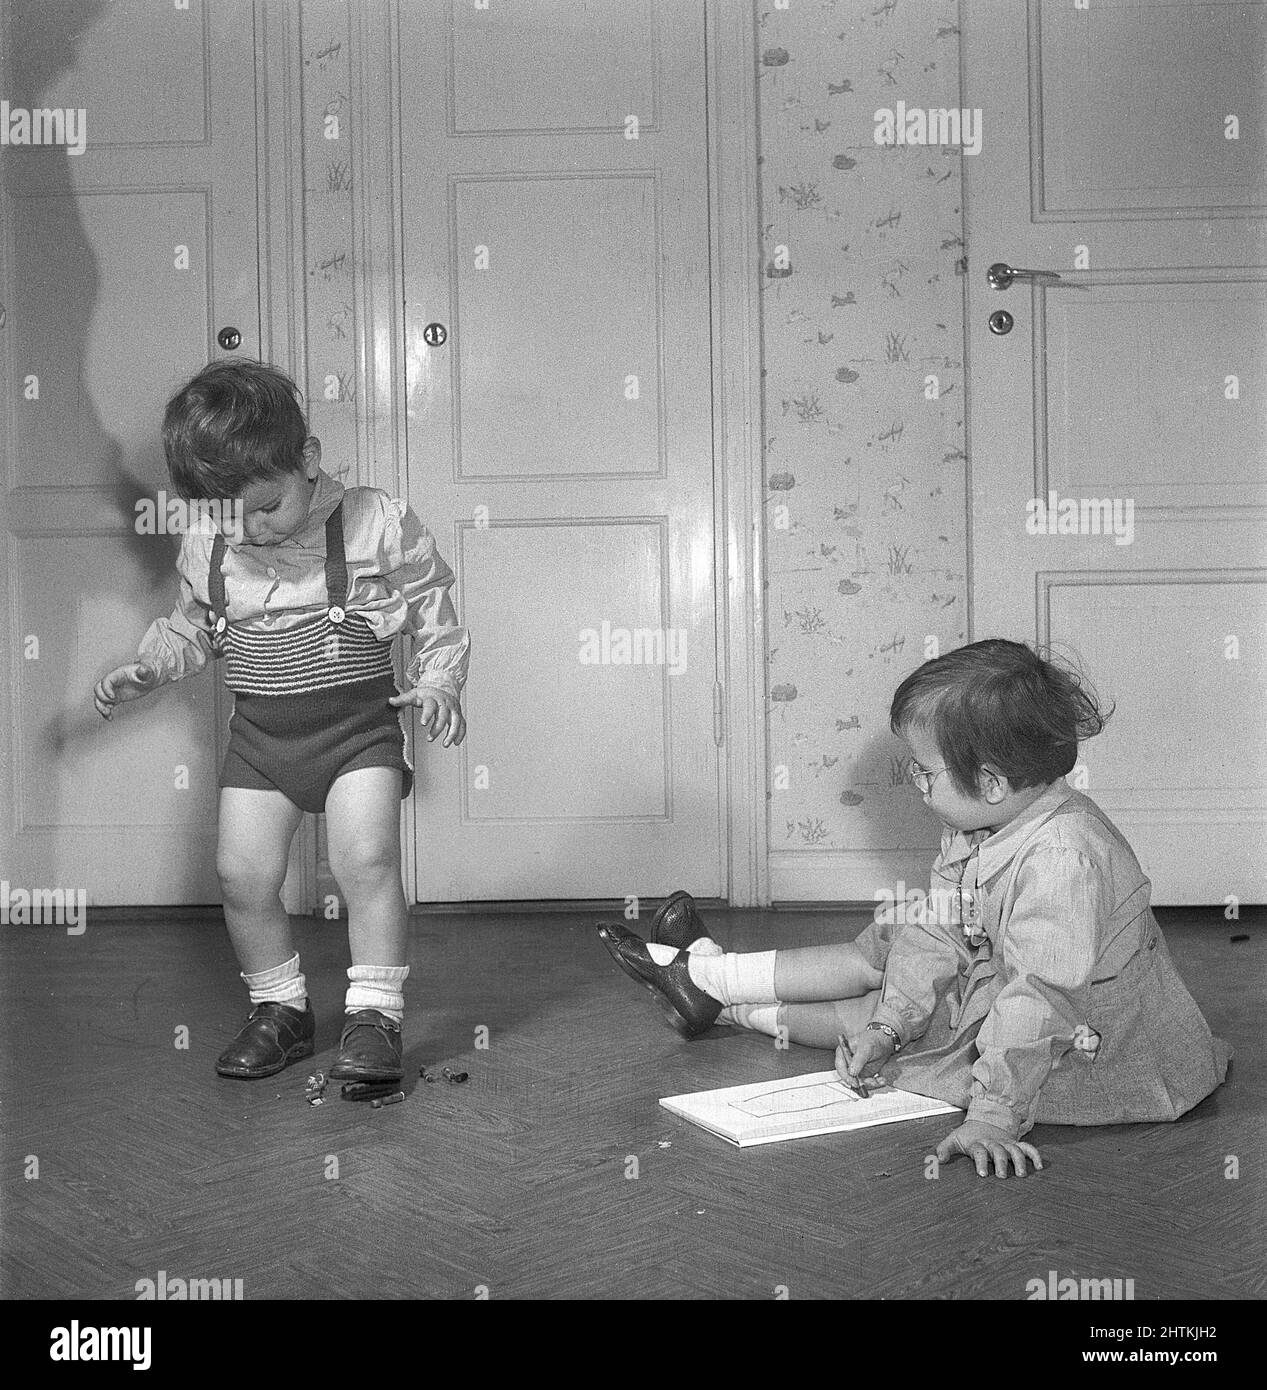 In the 1950s. Two children with crayons. The girl is creative and draws with it on a piece of paper while her brother thinks it's more fun to destroy them by crushing them with his foot. Sweden 1951. Kristoffersson BE41-11 Stock Photo